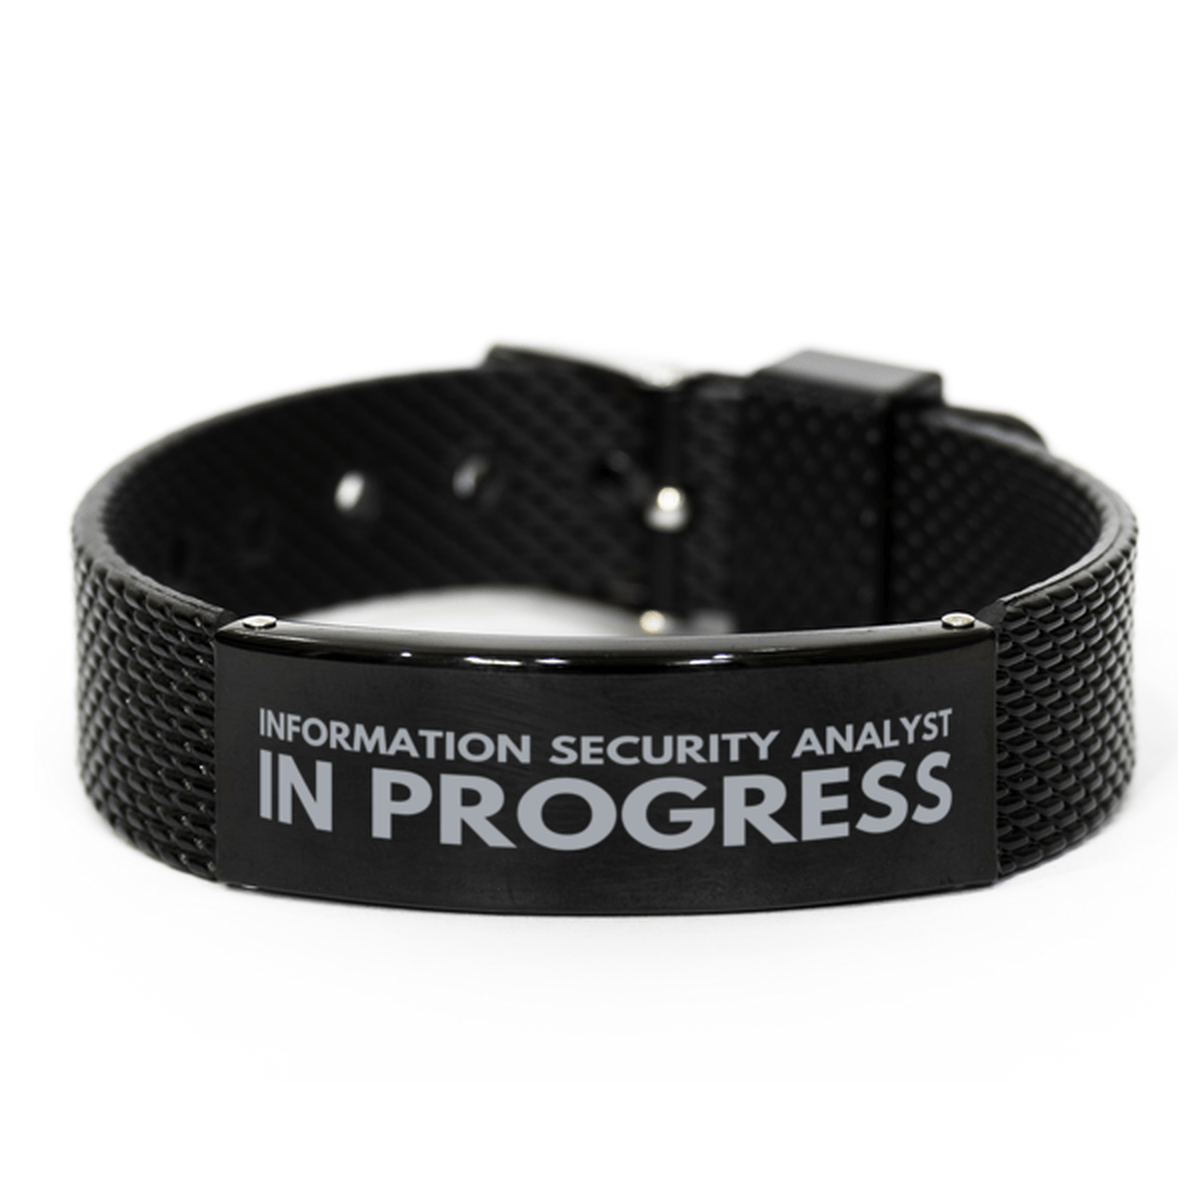 Inspirational Information Security Analyst Black Shark Mesh Bracelet, Information Security Analyst In Progress, Best Graduation Gifts for Students